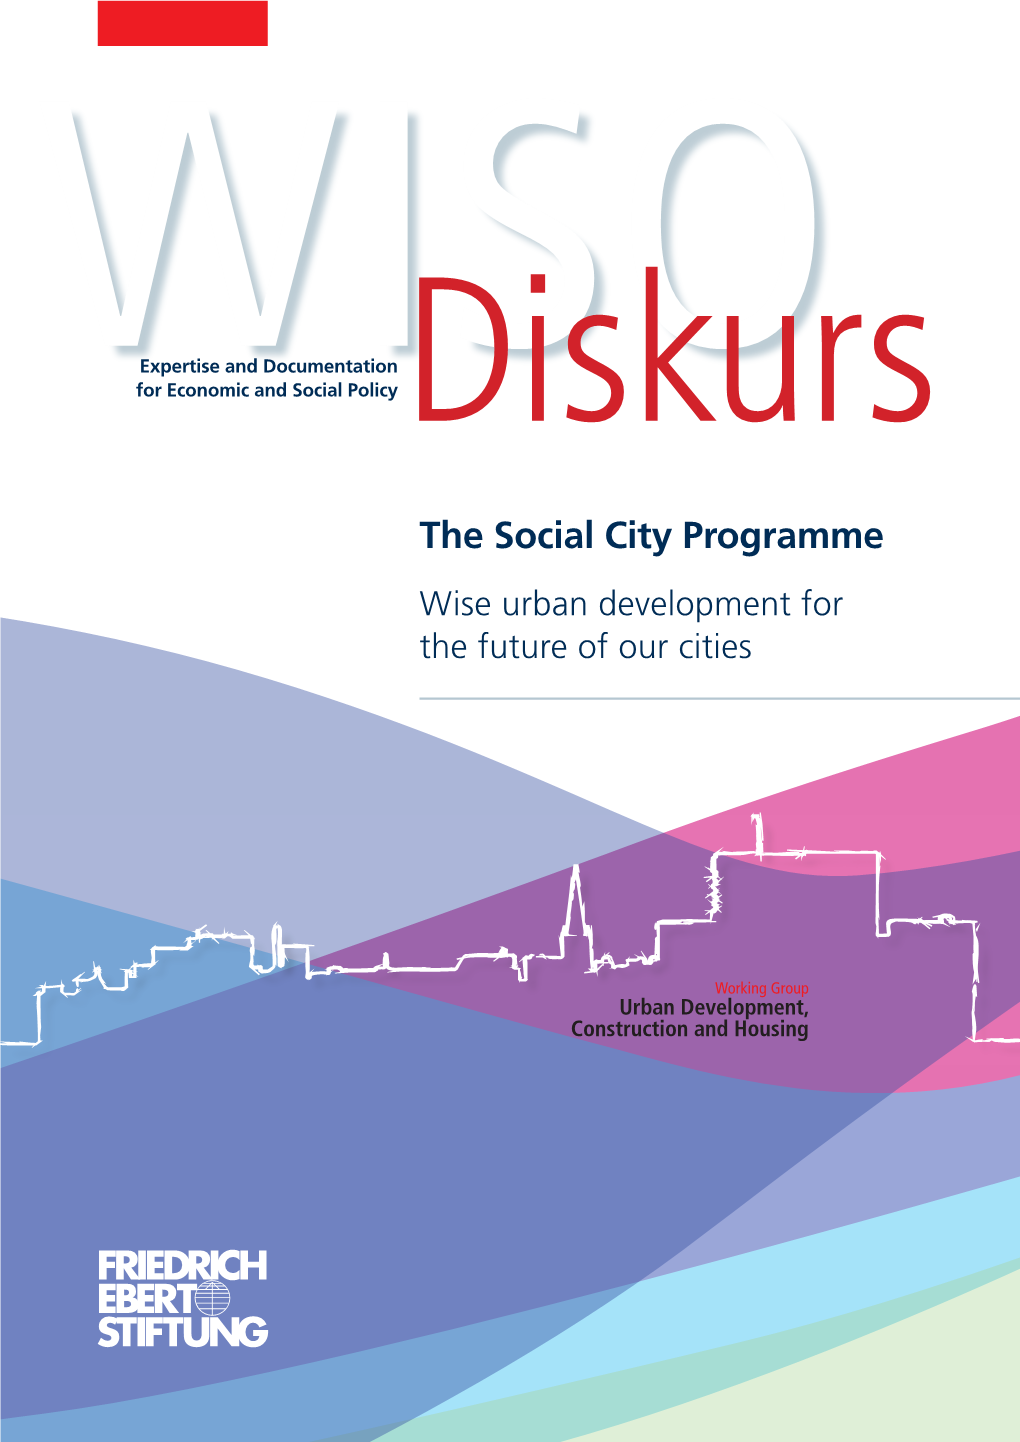 The Social City Programme Wise Urban Development for the Future of Our Cities